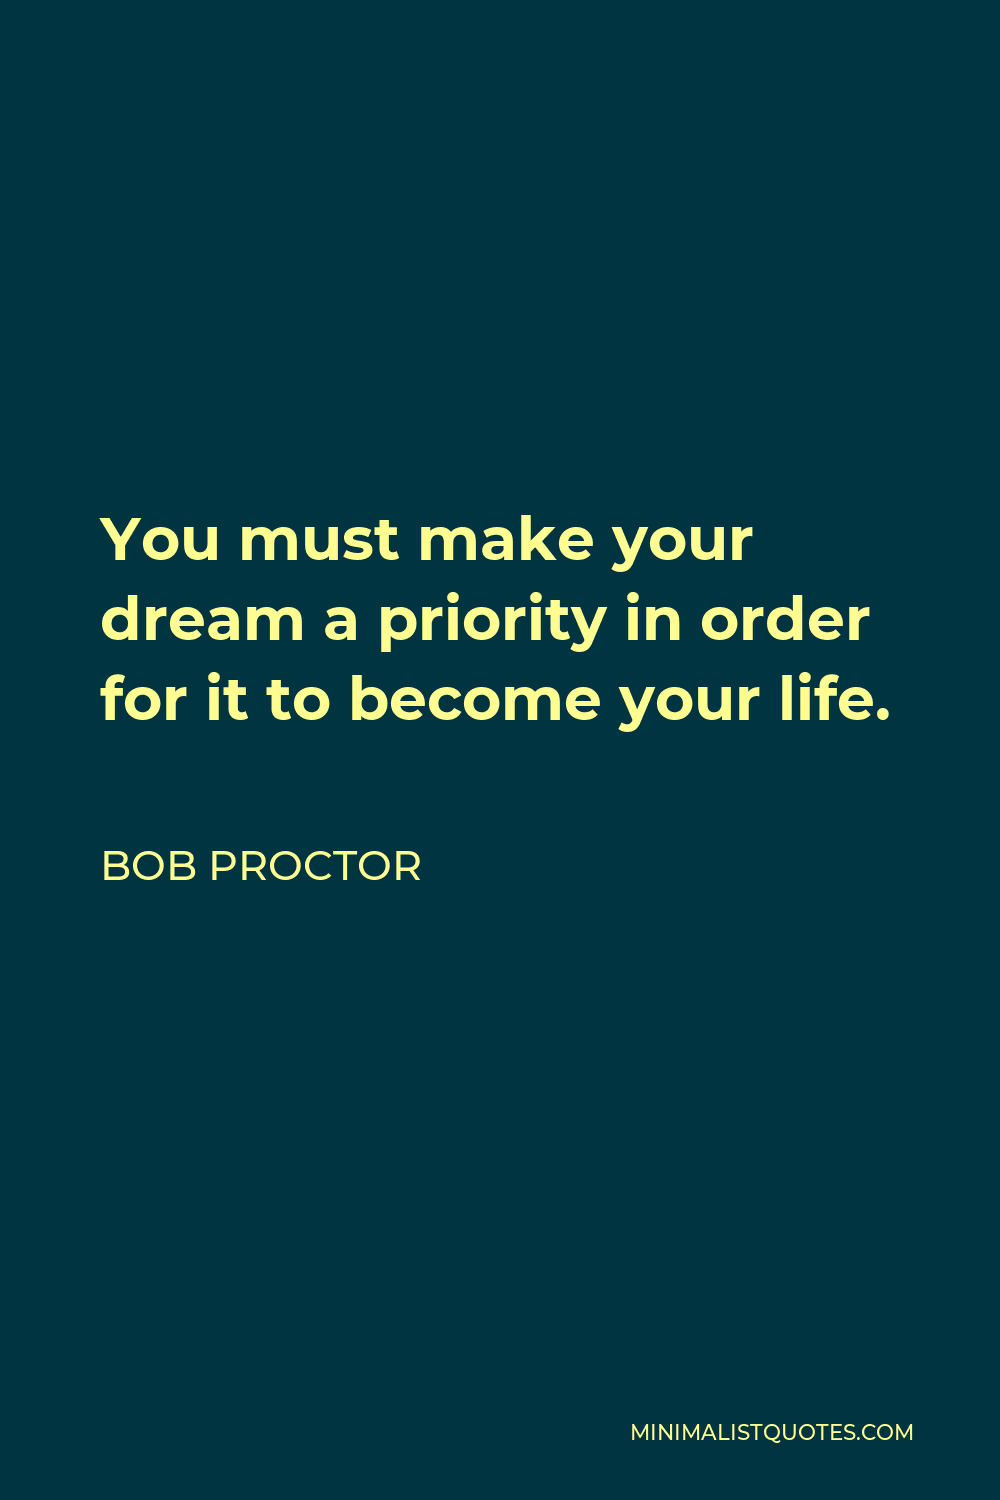 Bob Proctor Quote - You must make your dream a priority in order for it to become your life.